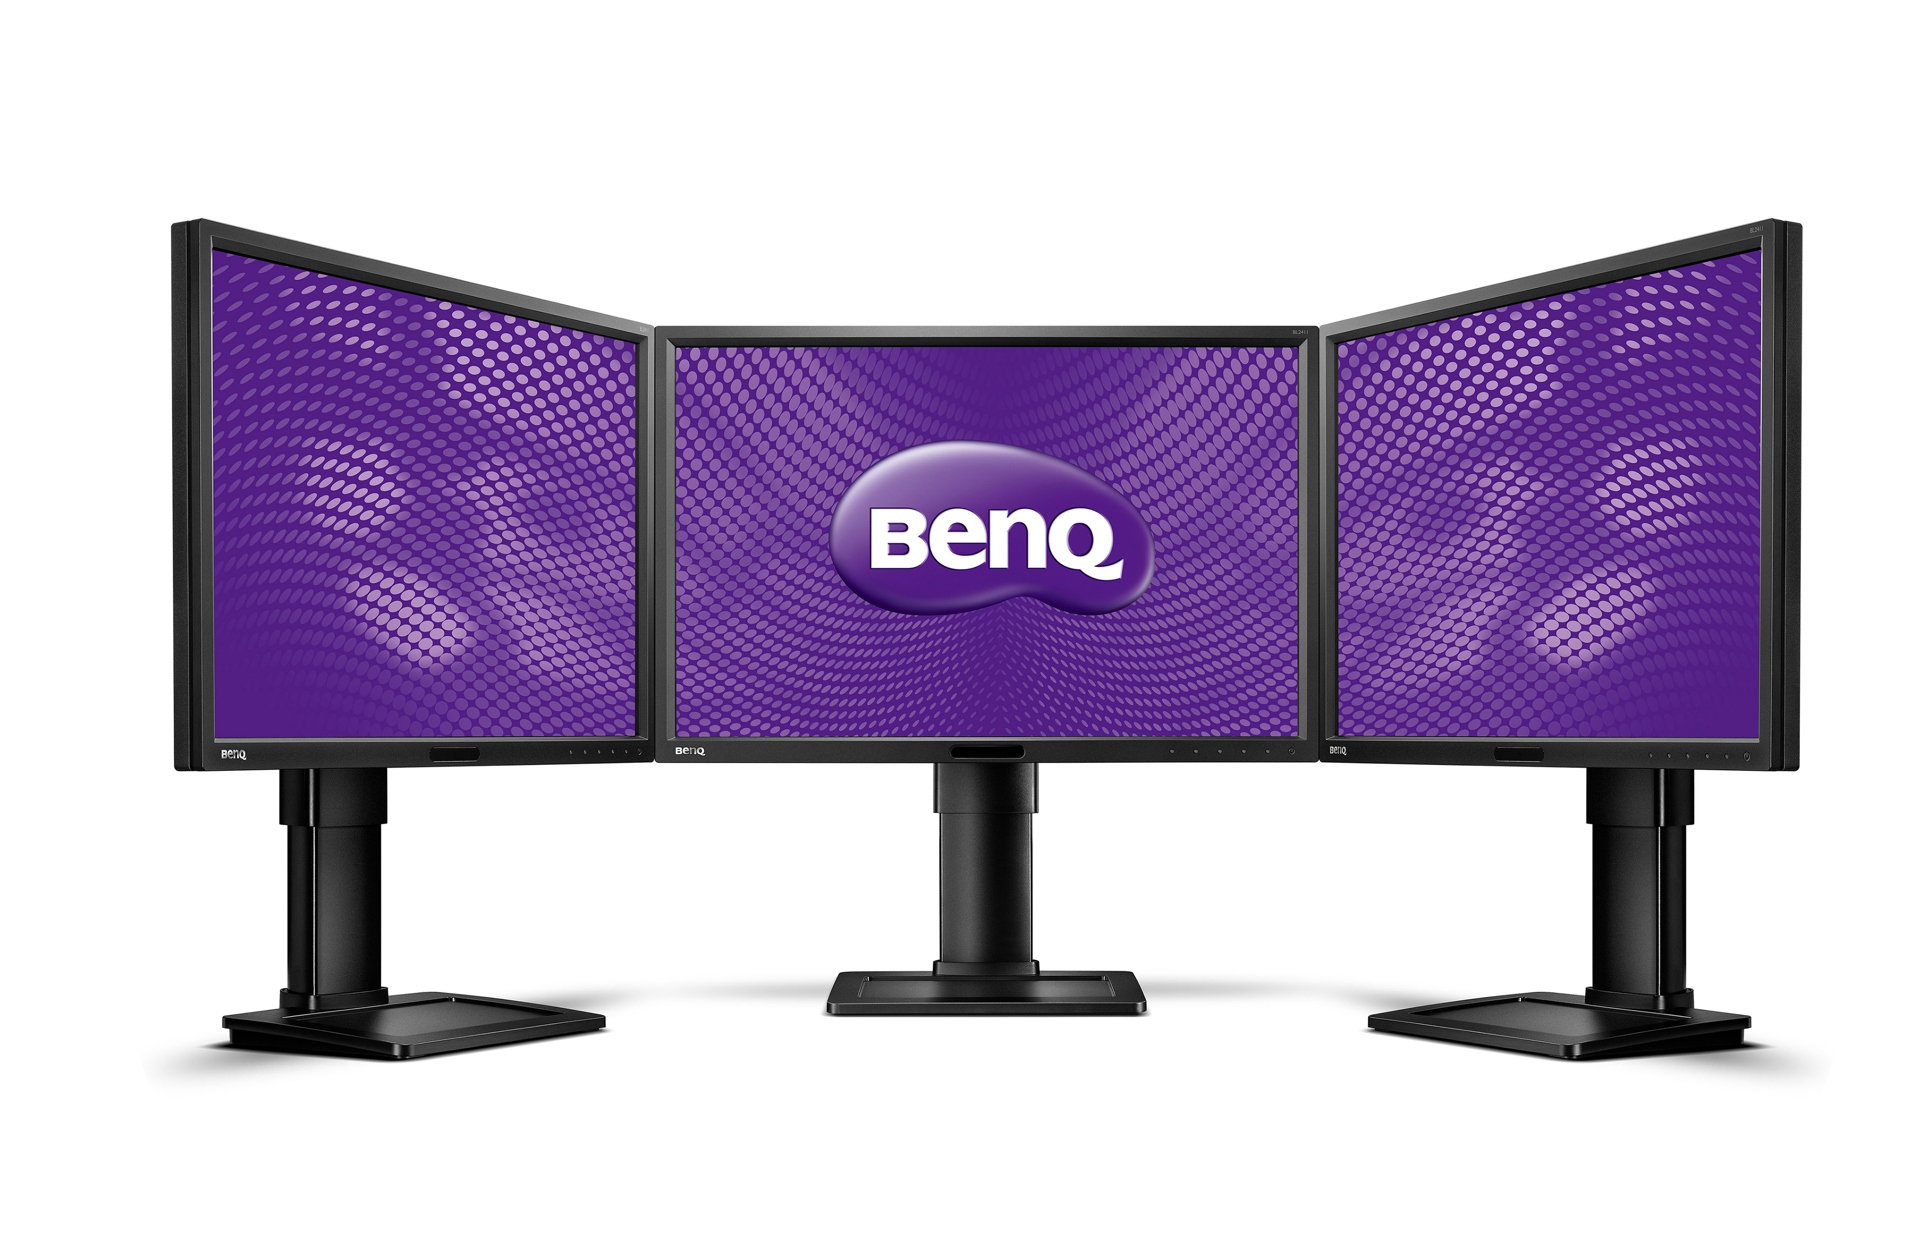 Media asset in full size related to 3dfxzone.it news item entitled as follows: BenQ introduce il monitor BL2411PT con pannello IPS e Senseye | Image Name: news19609_BenQ-BL2411PT-24-Inch-LCD-Monitor_2.jpg